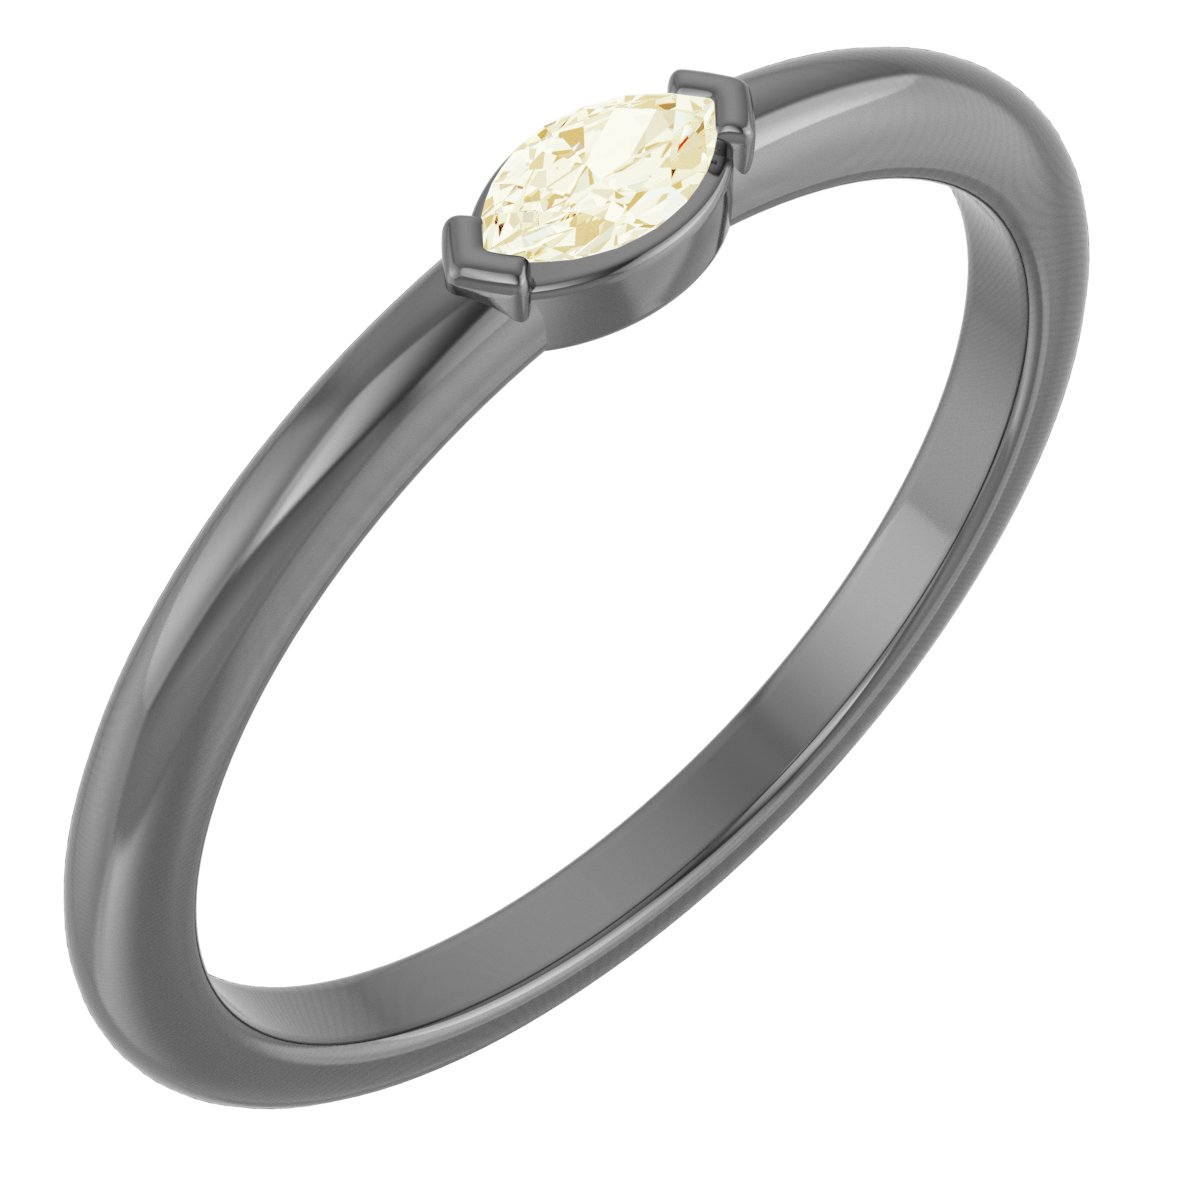 14K Yellow 1/8 CTW Natural Diamond Solitaire Ring